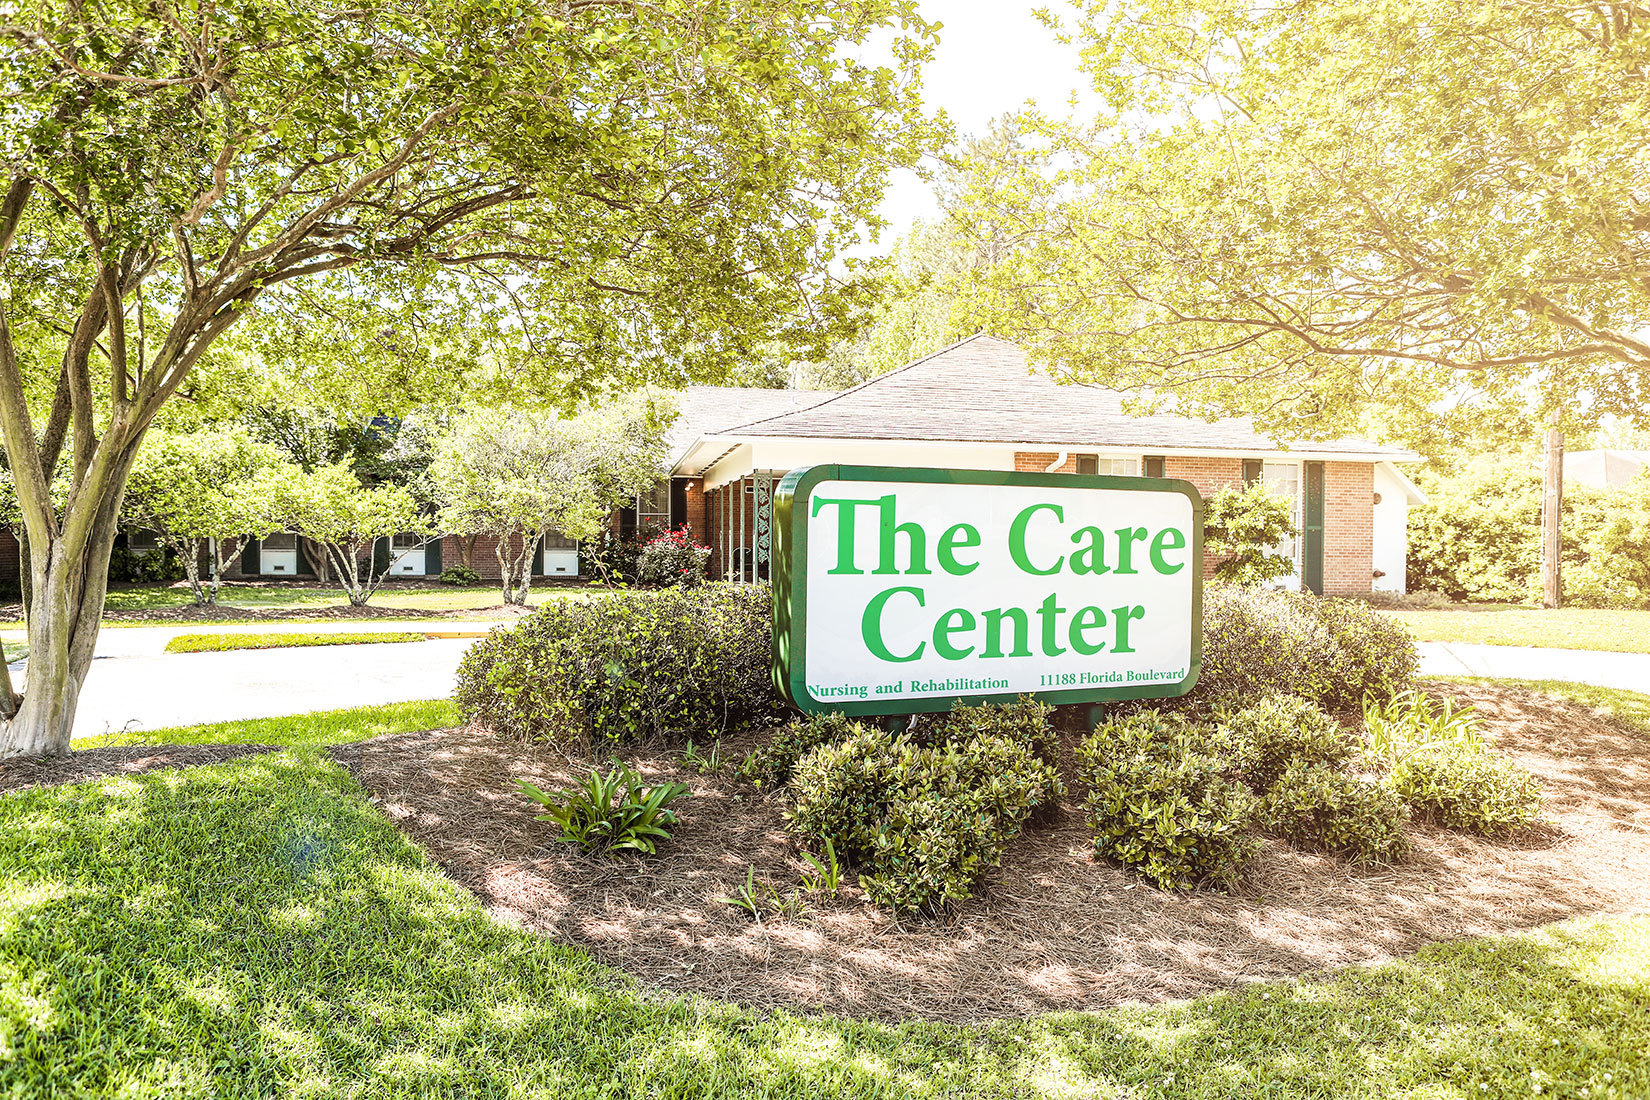 The Care Center sign